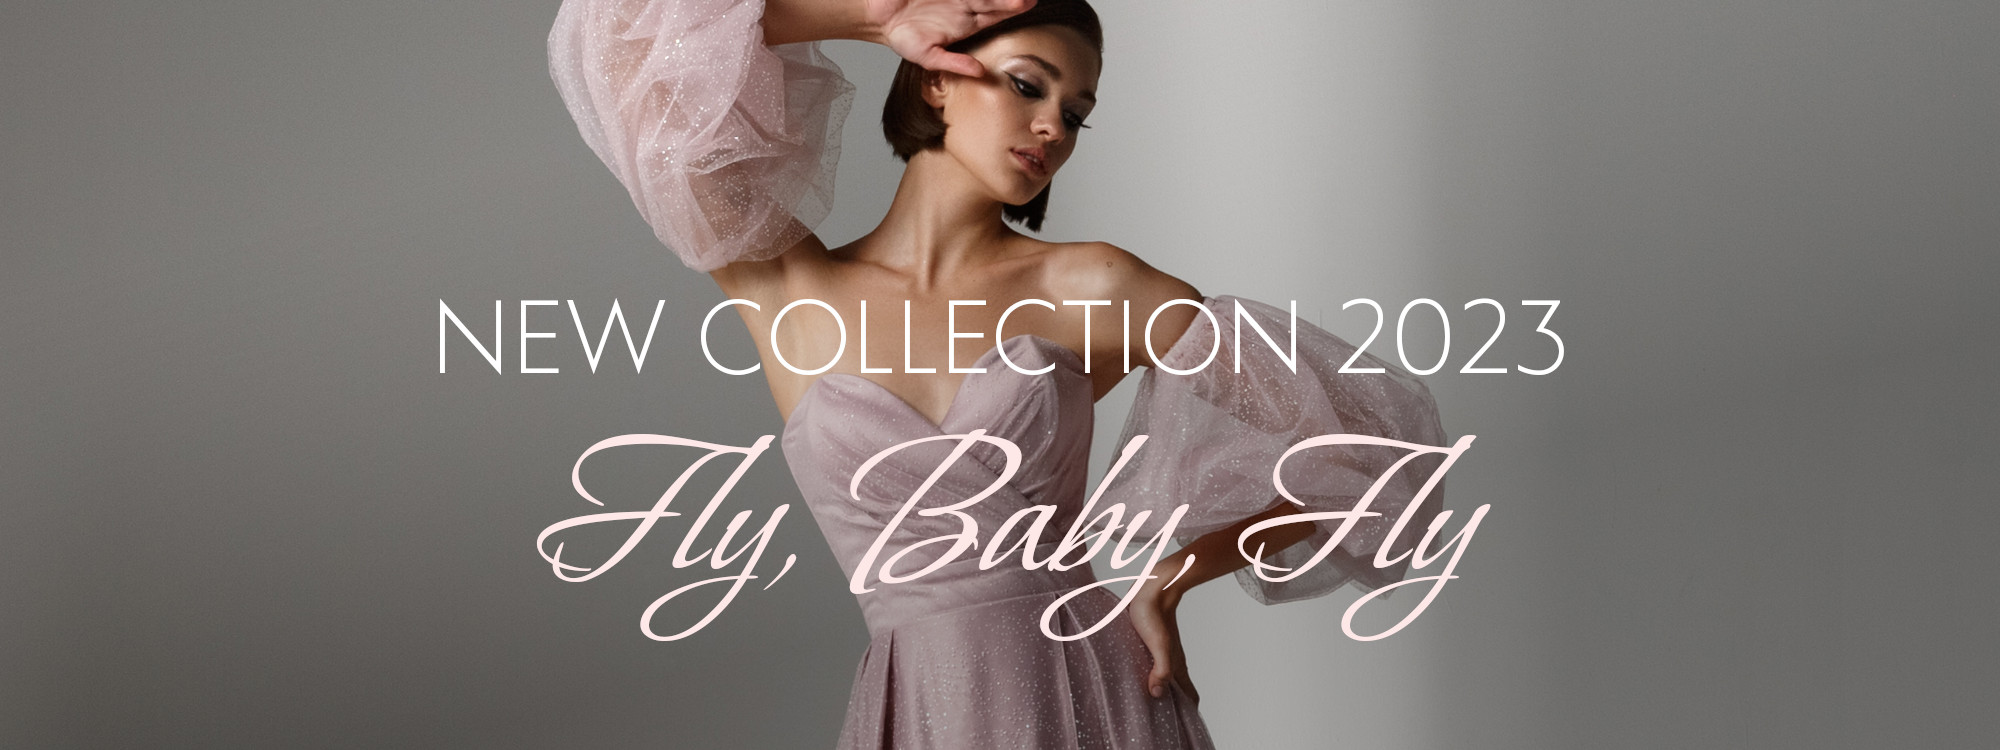 Fly baby fly - evening dresses collection by Paulain